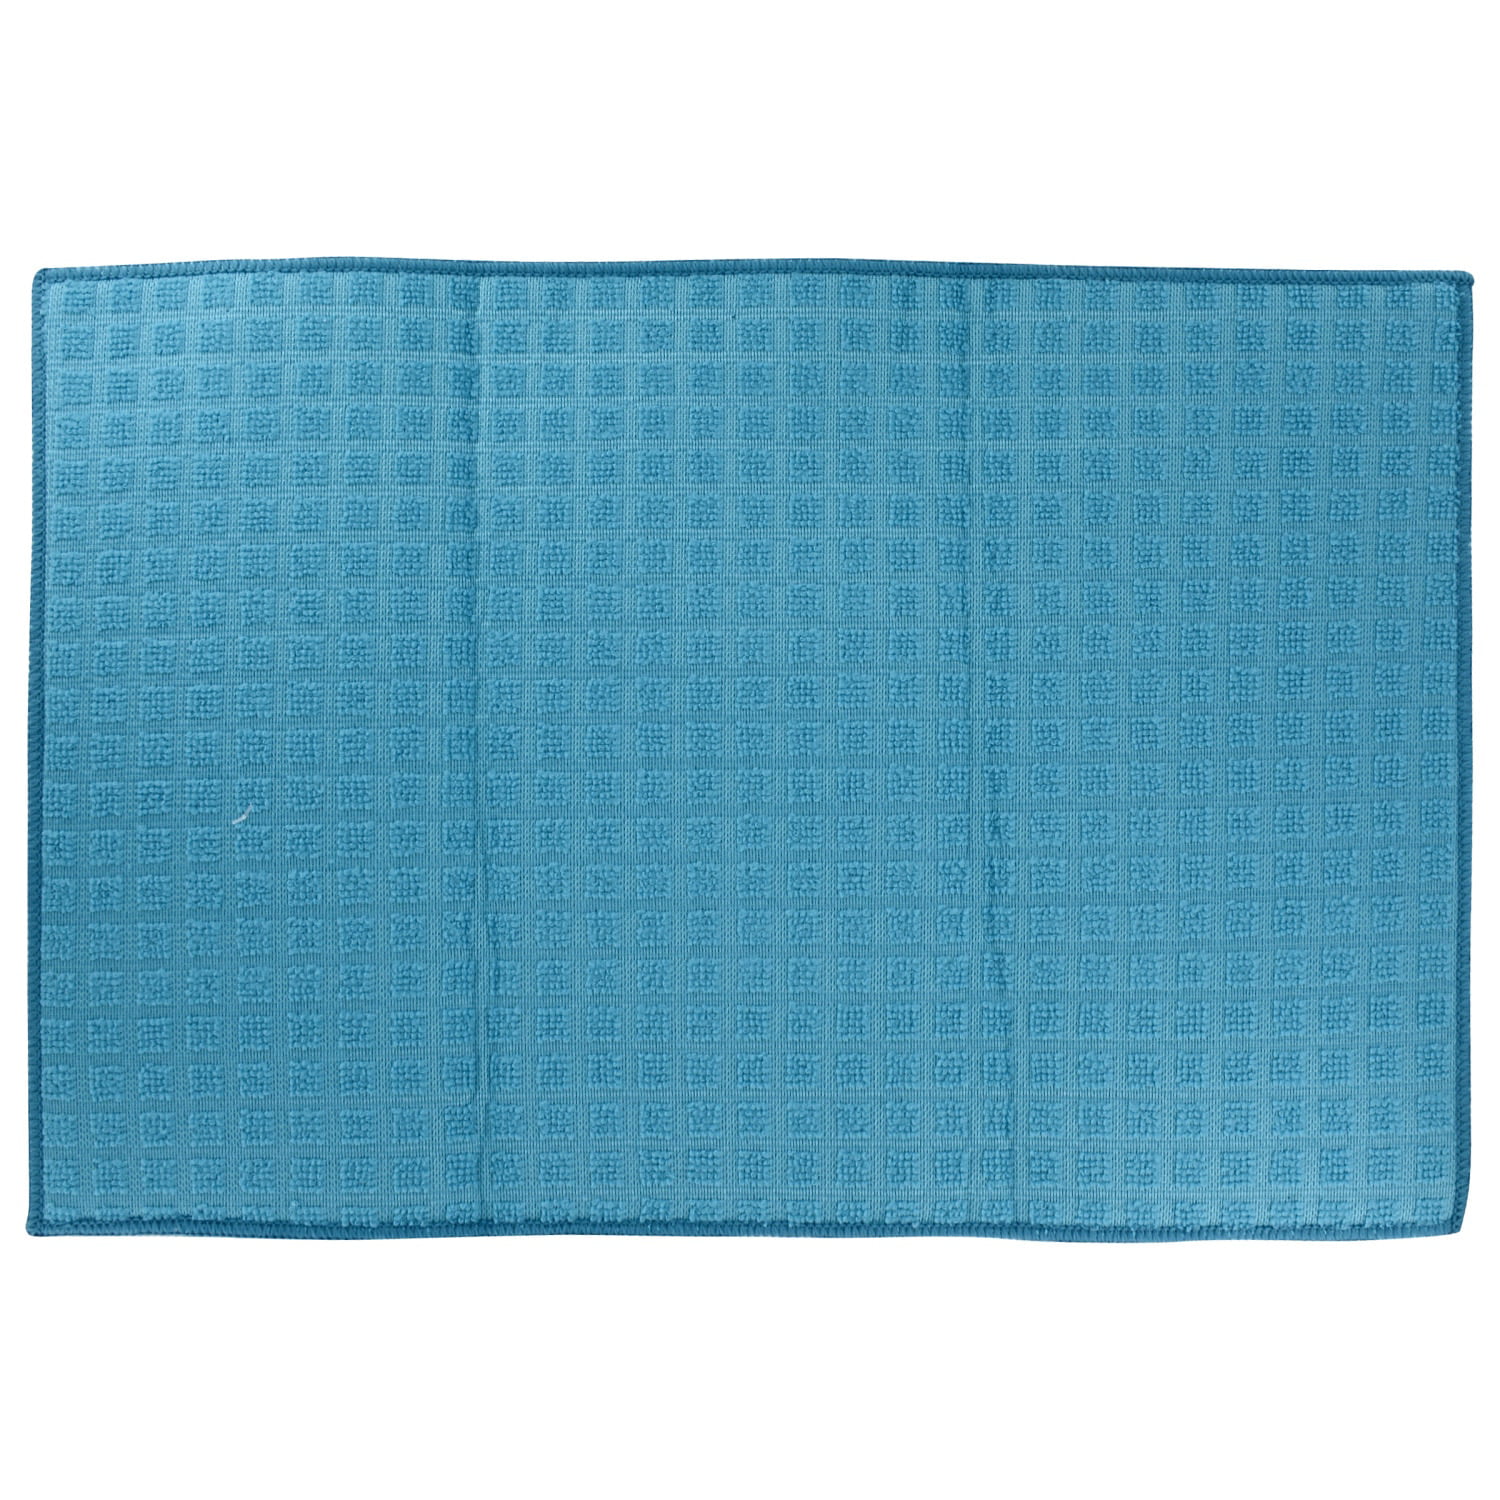 Dish Drying Mats Set of 2 in Turquoise Microfiber 12x18 Kitchen FREE SHIPPING 